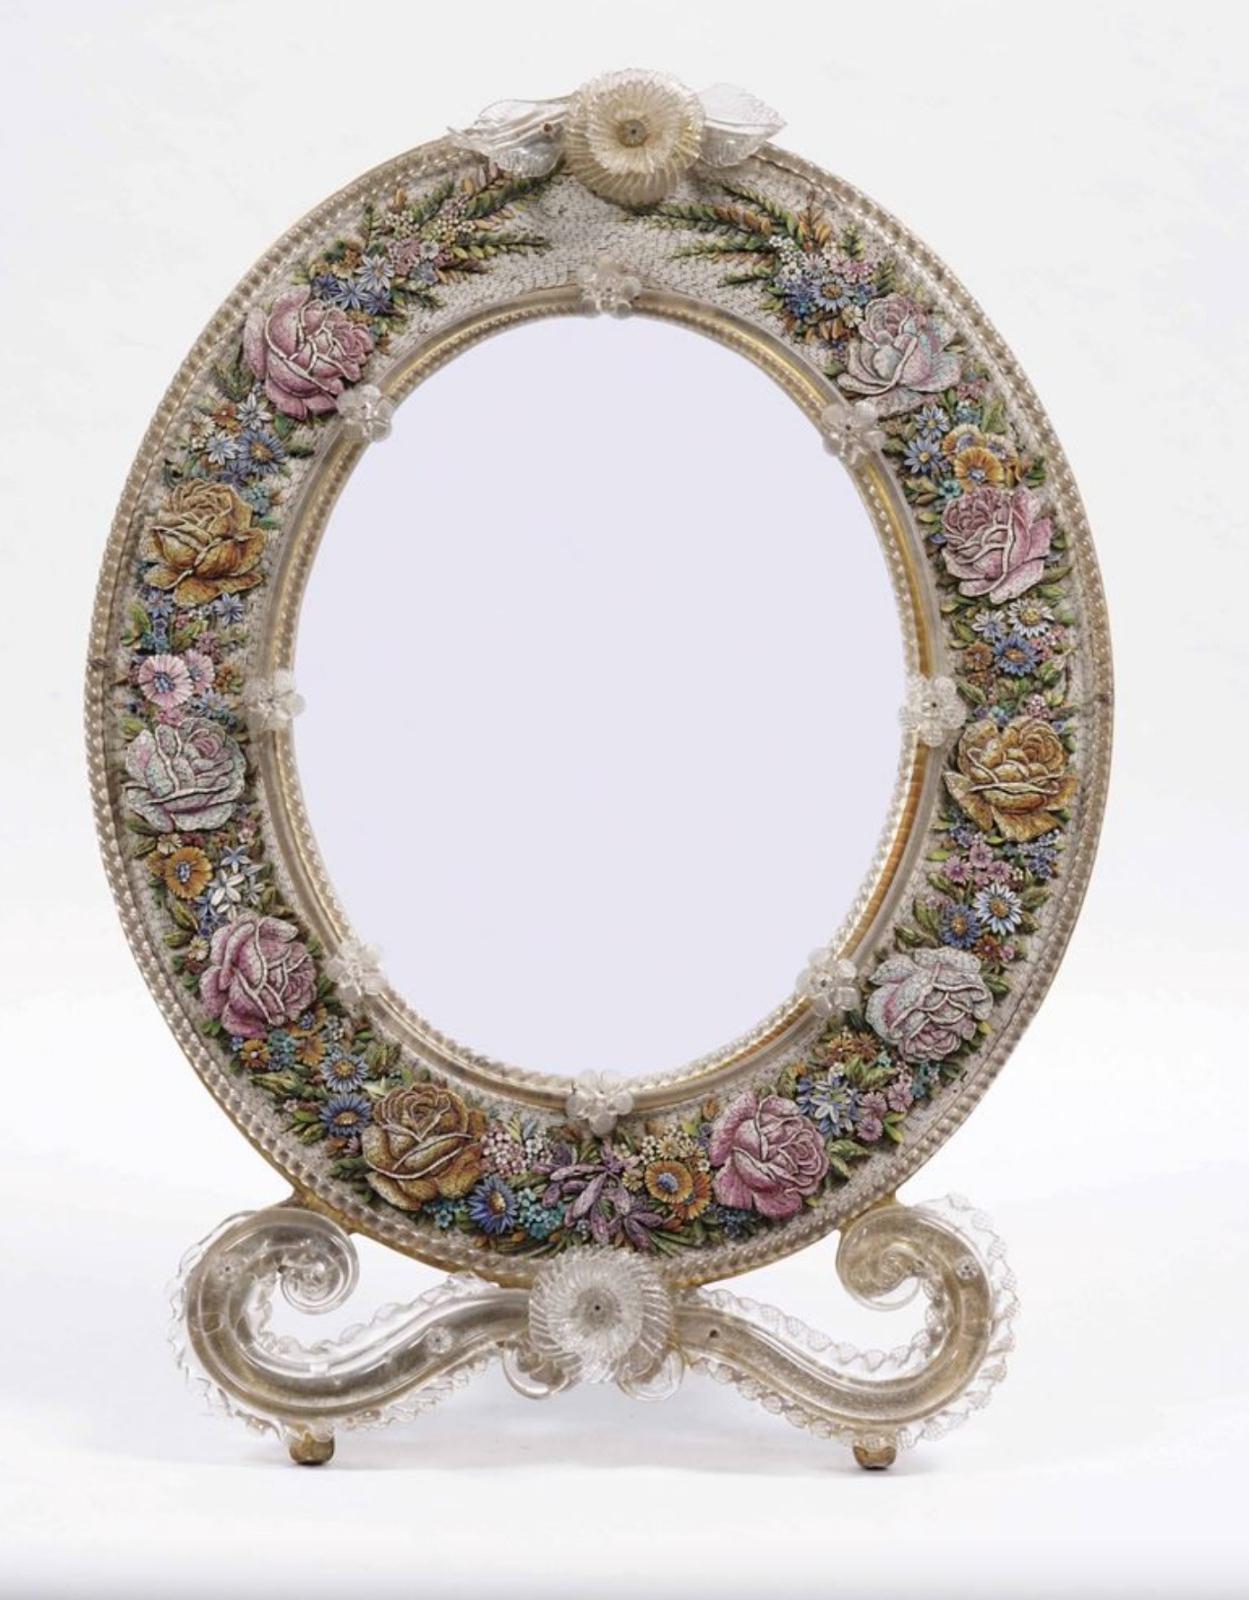 Oval Venetian Mirror with Floral Micromosaic Frame. 
20th century
Italy
m 38X32X65

good conditions
